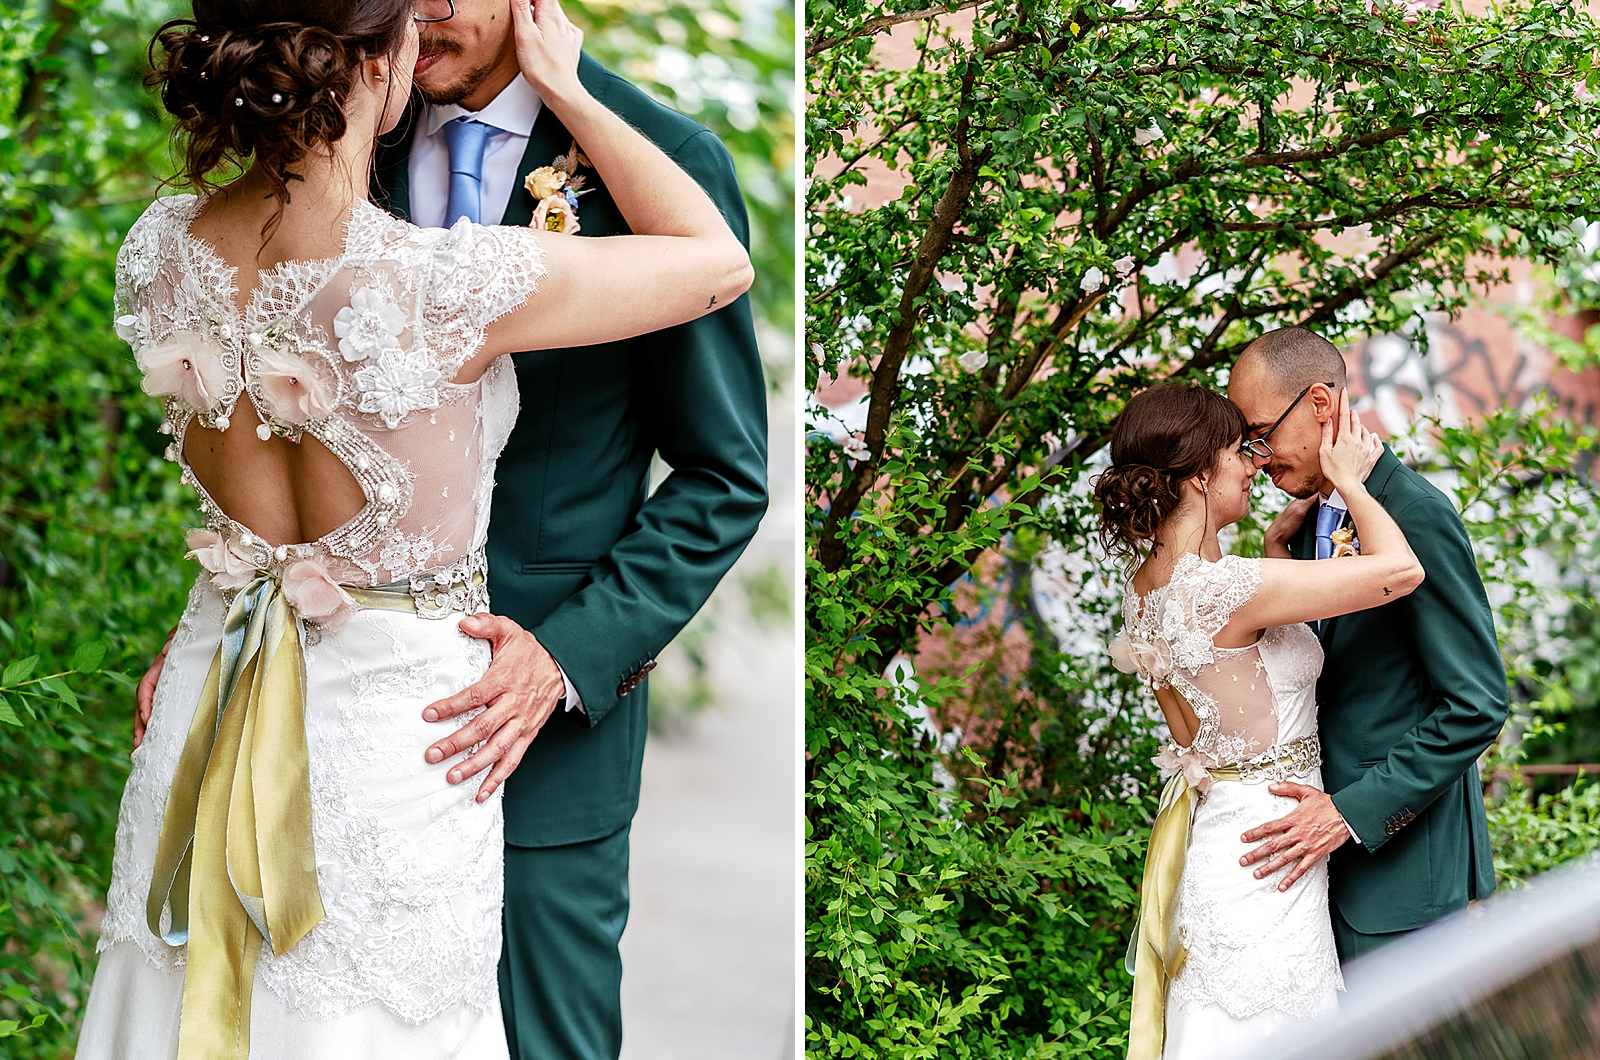 Left photo: Shot of the bride and groom embracing. 
Right photo: Shot of the bride and groom embracing. 